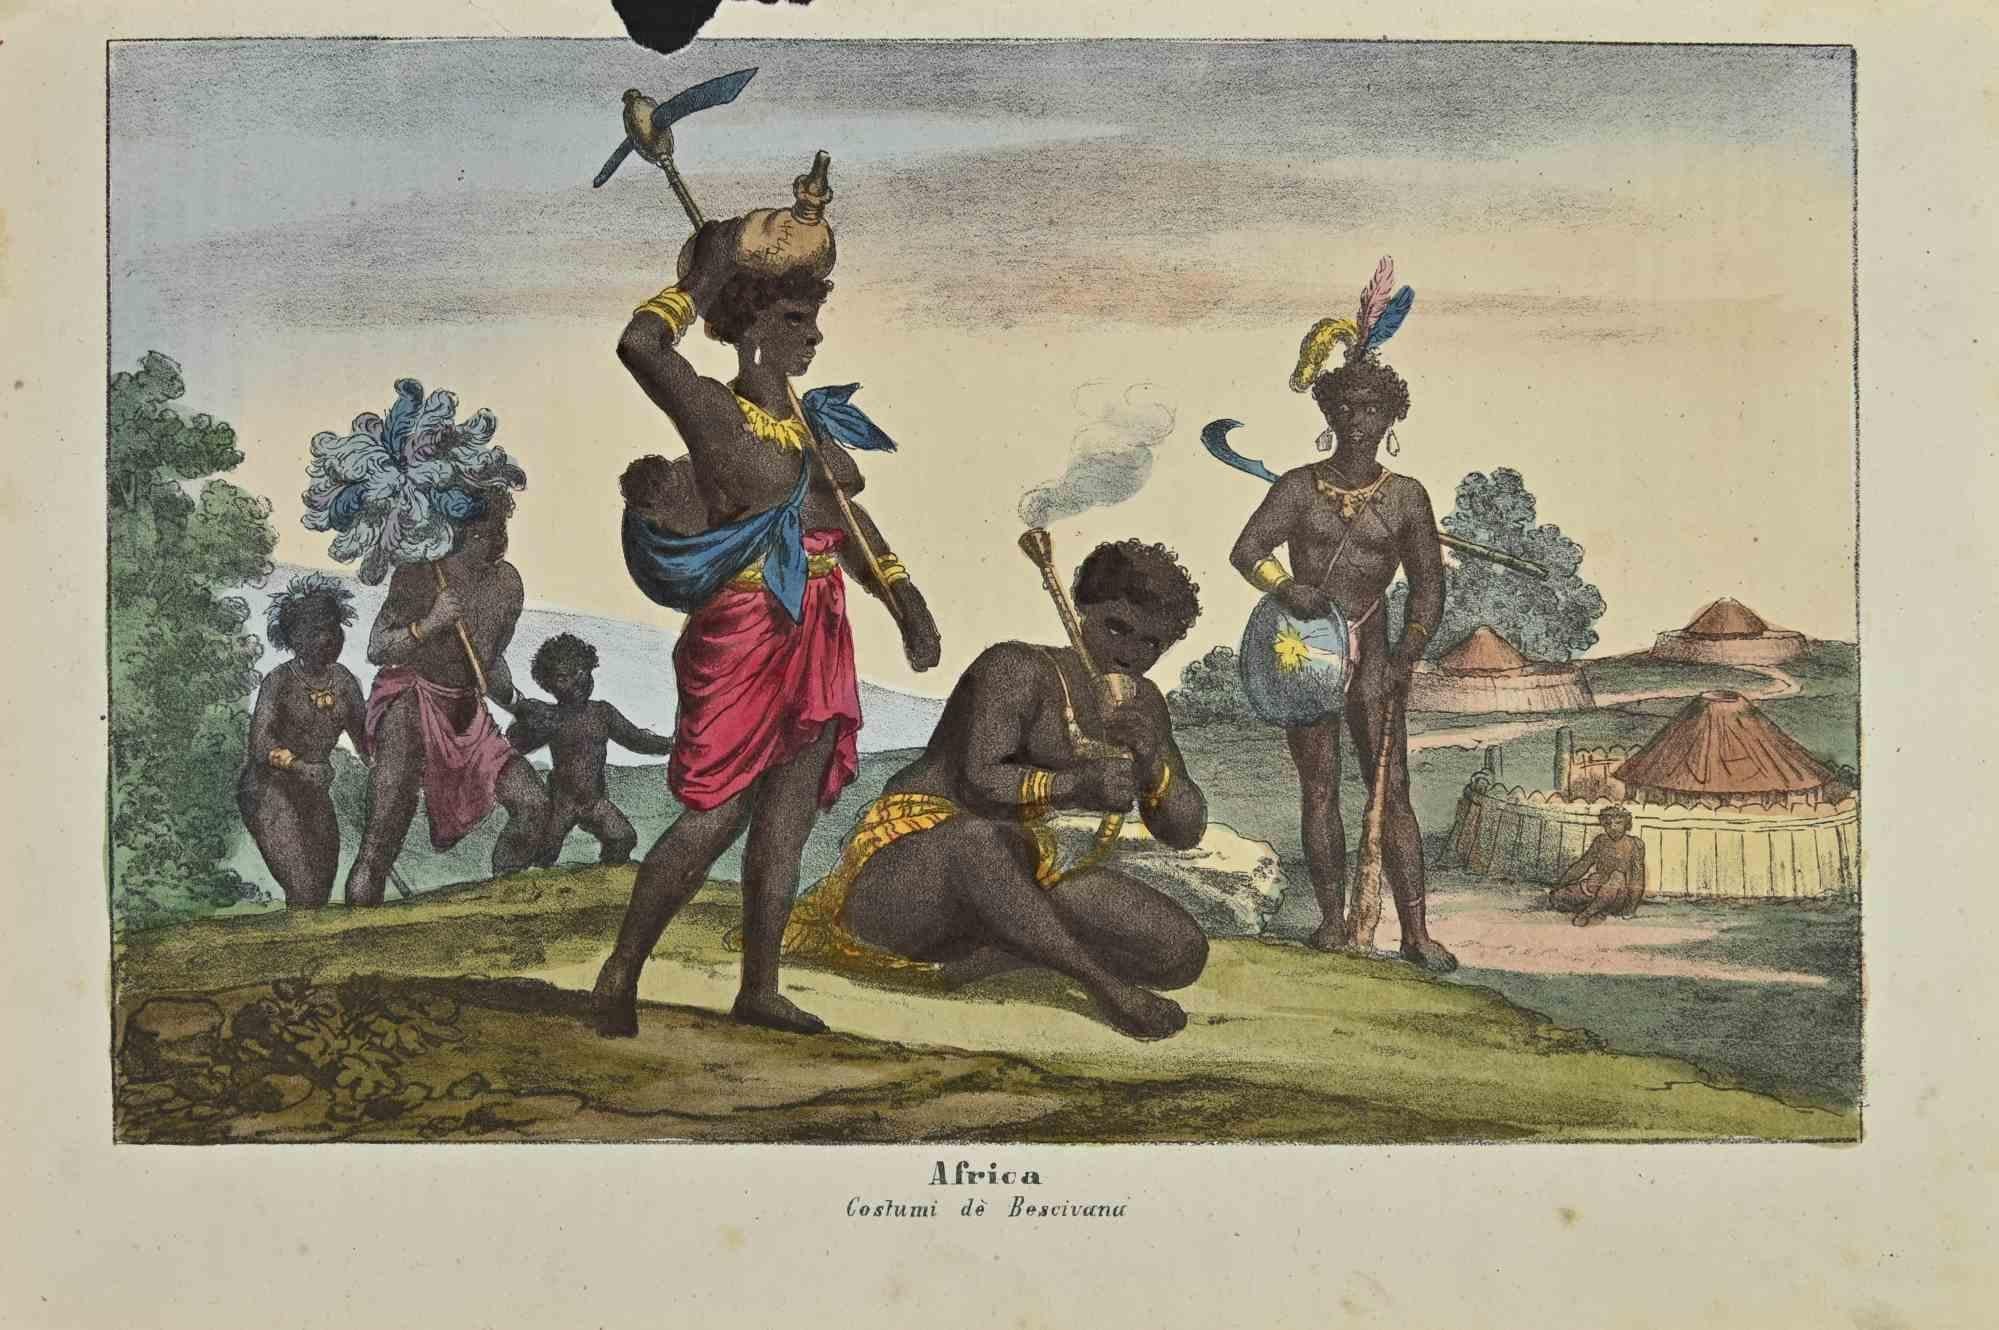 Ancient African Customs is a lithograph made by Auguste Wahlen in 1844.

Hand colored.

Good condition.

At the center of the artwork is the original title "Africa" and subtitle "Costumi dè Bescivana". 

The work is part of Suite Moeurs, usages et